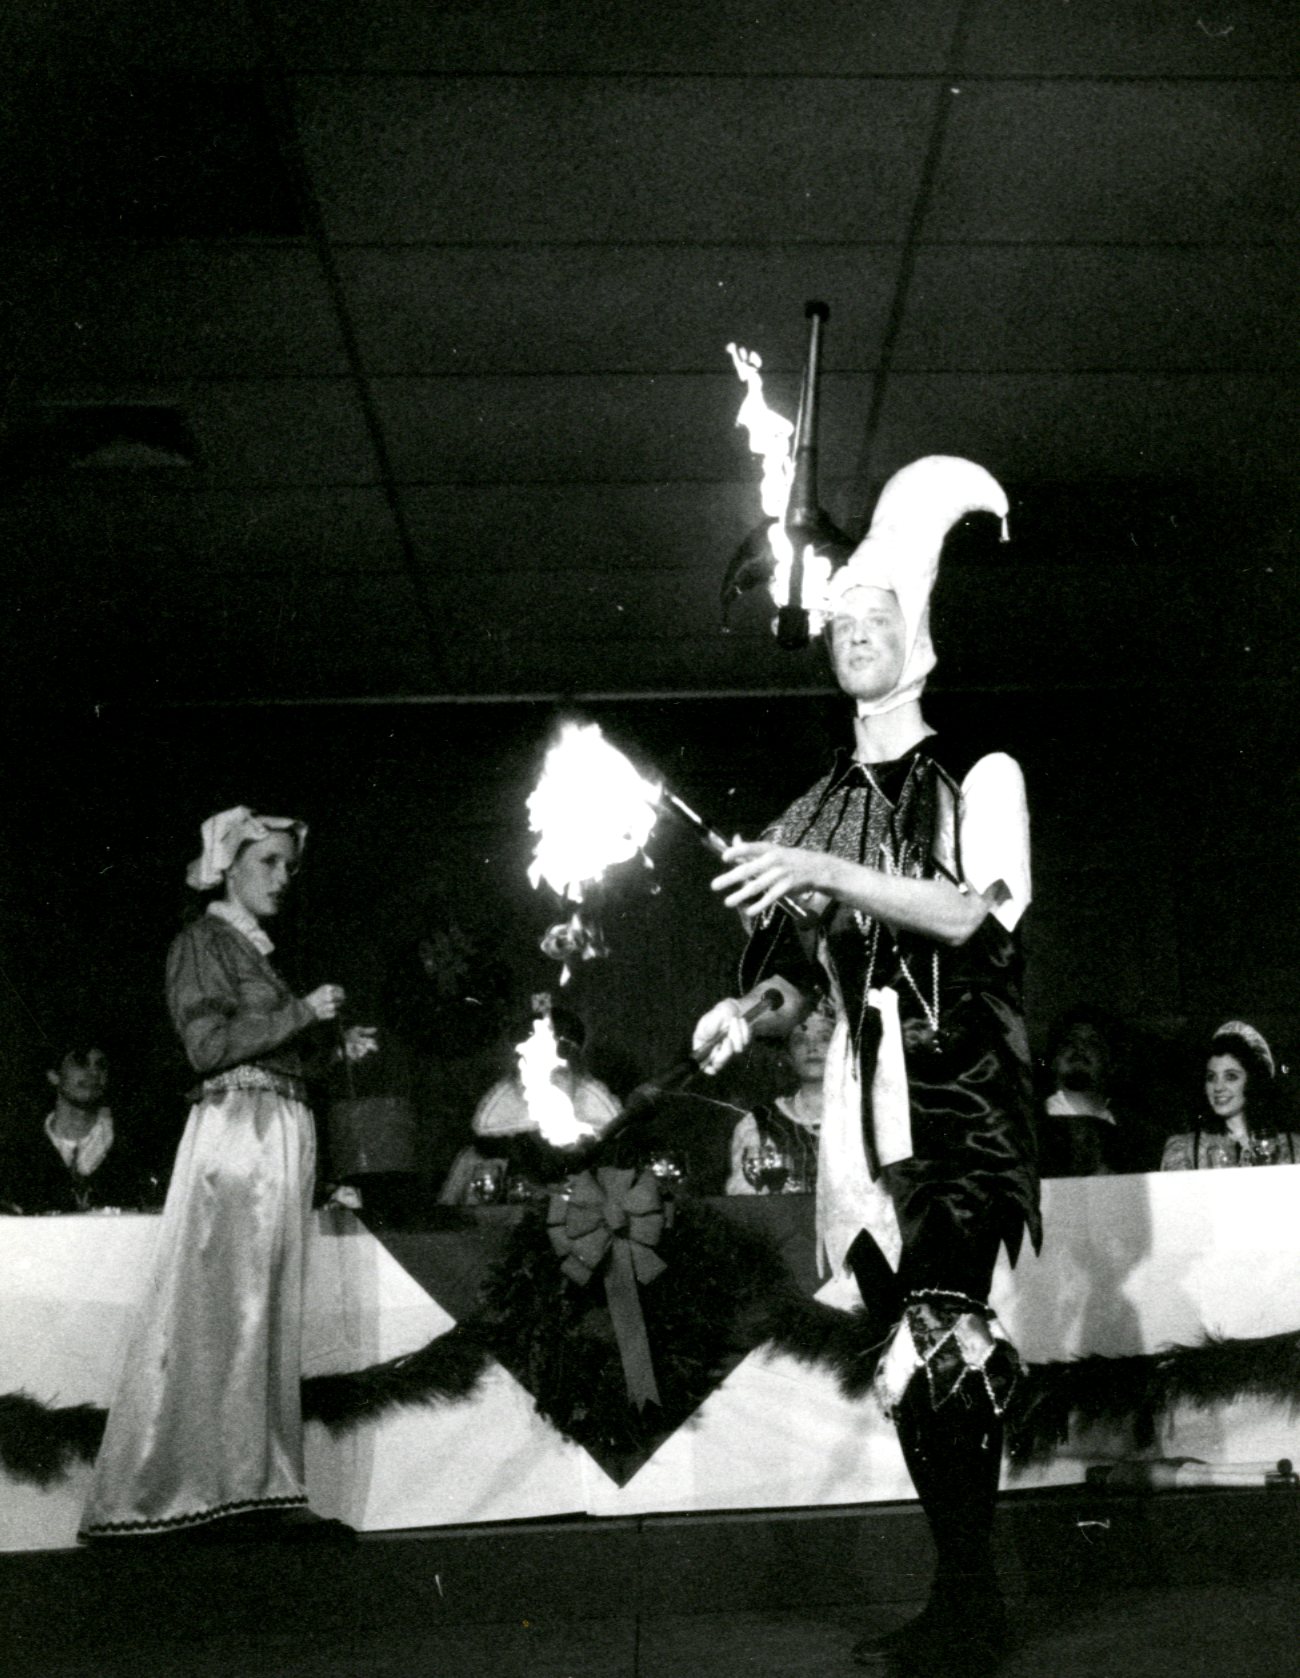 His Majesty’s Jugglers, 1995. Milligan College Archives & Special Collections.